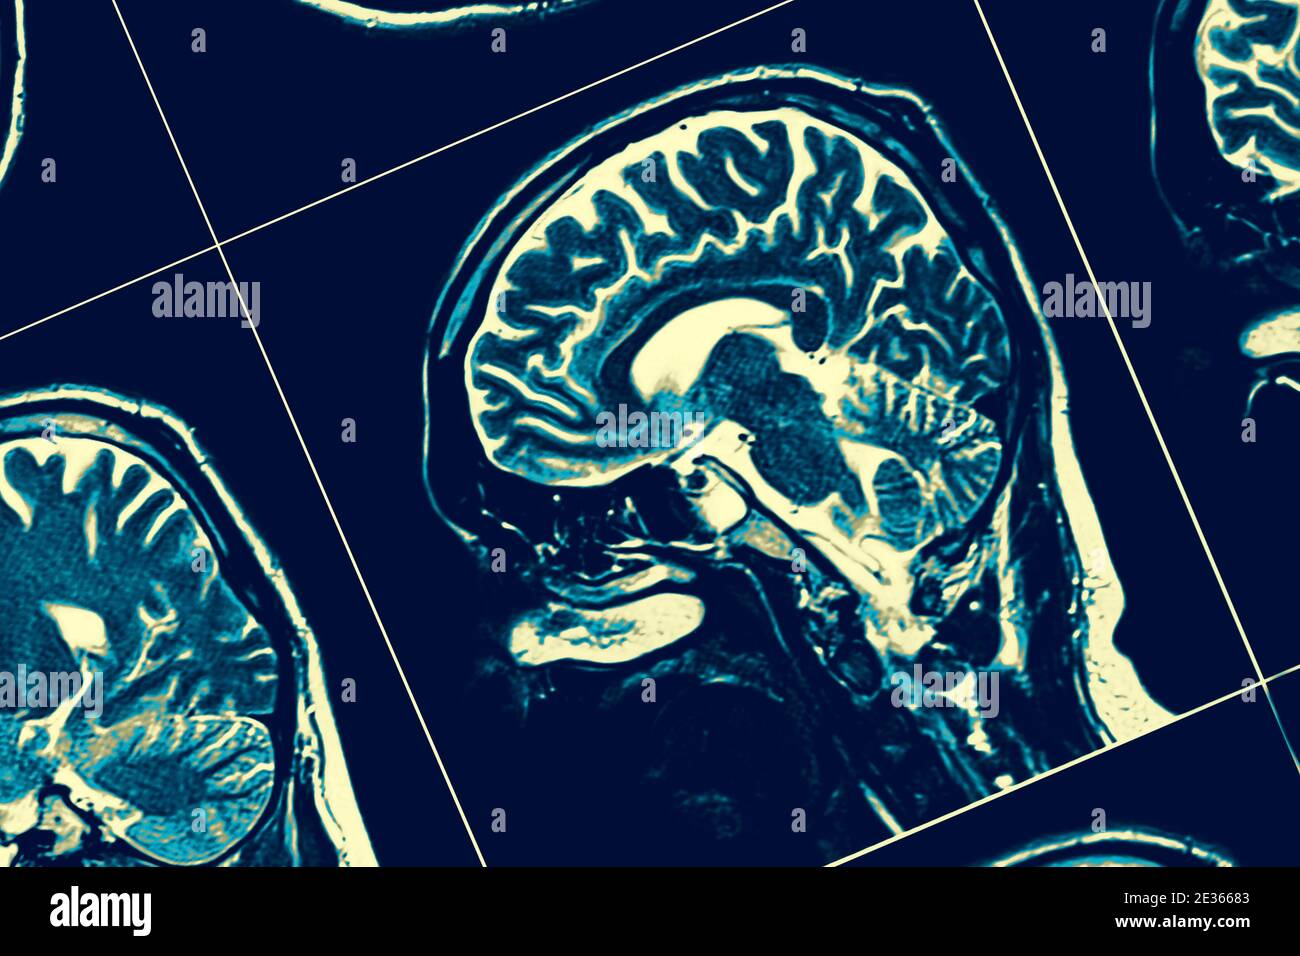 Sagittal section of the brain. Stock Photo